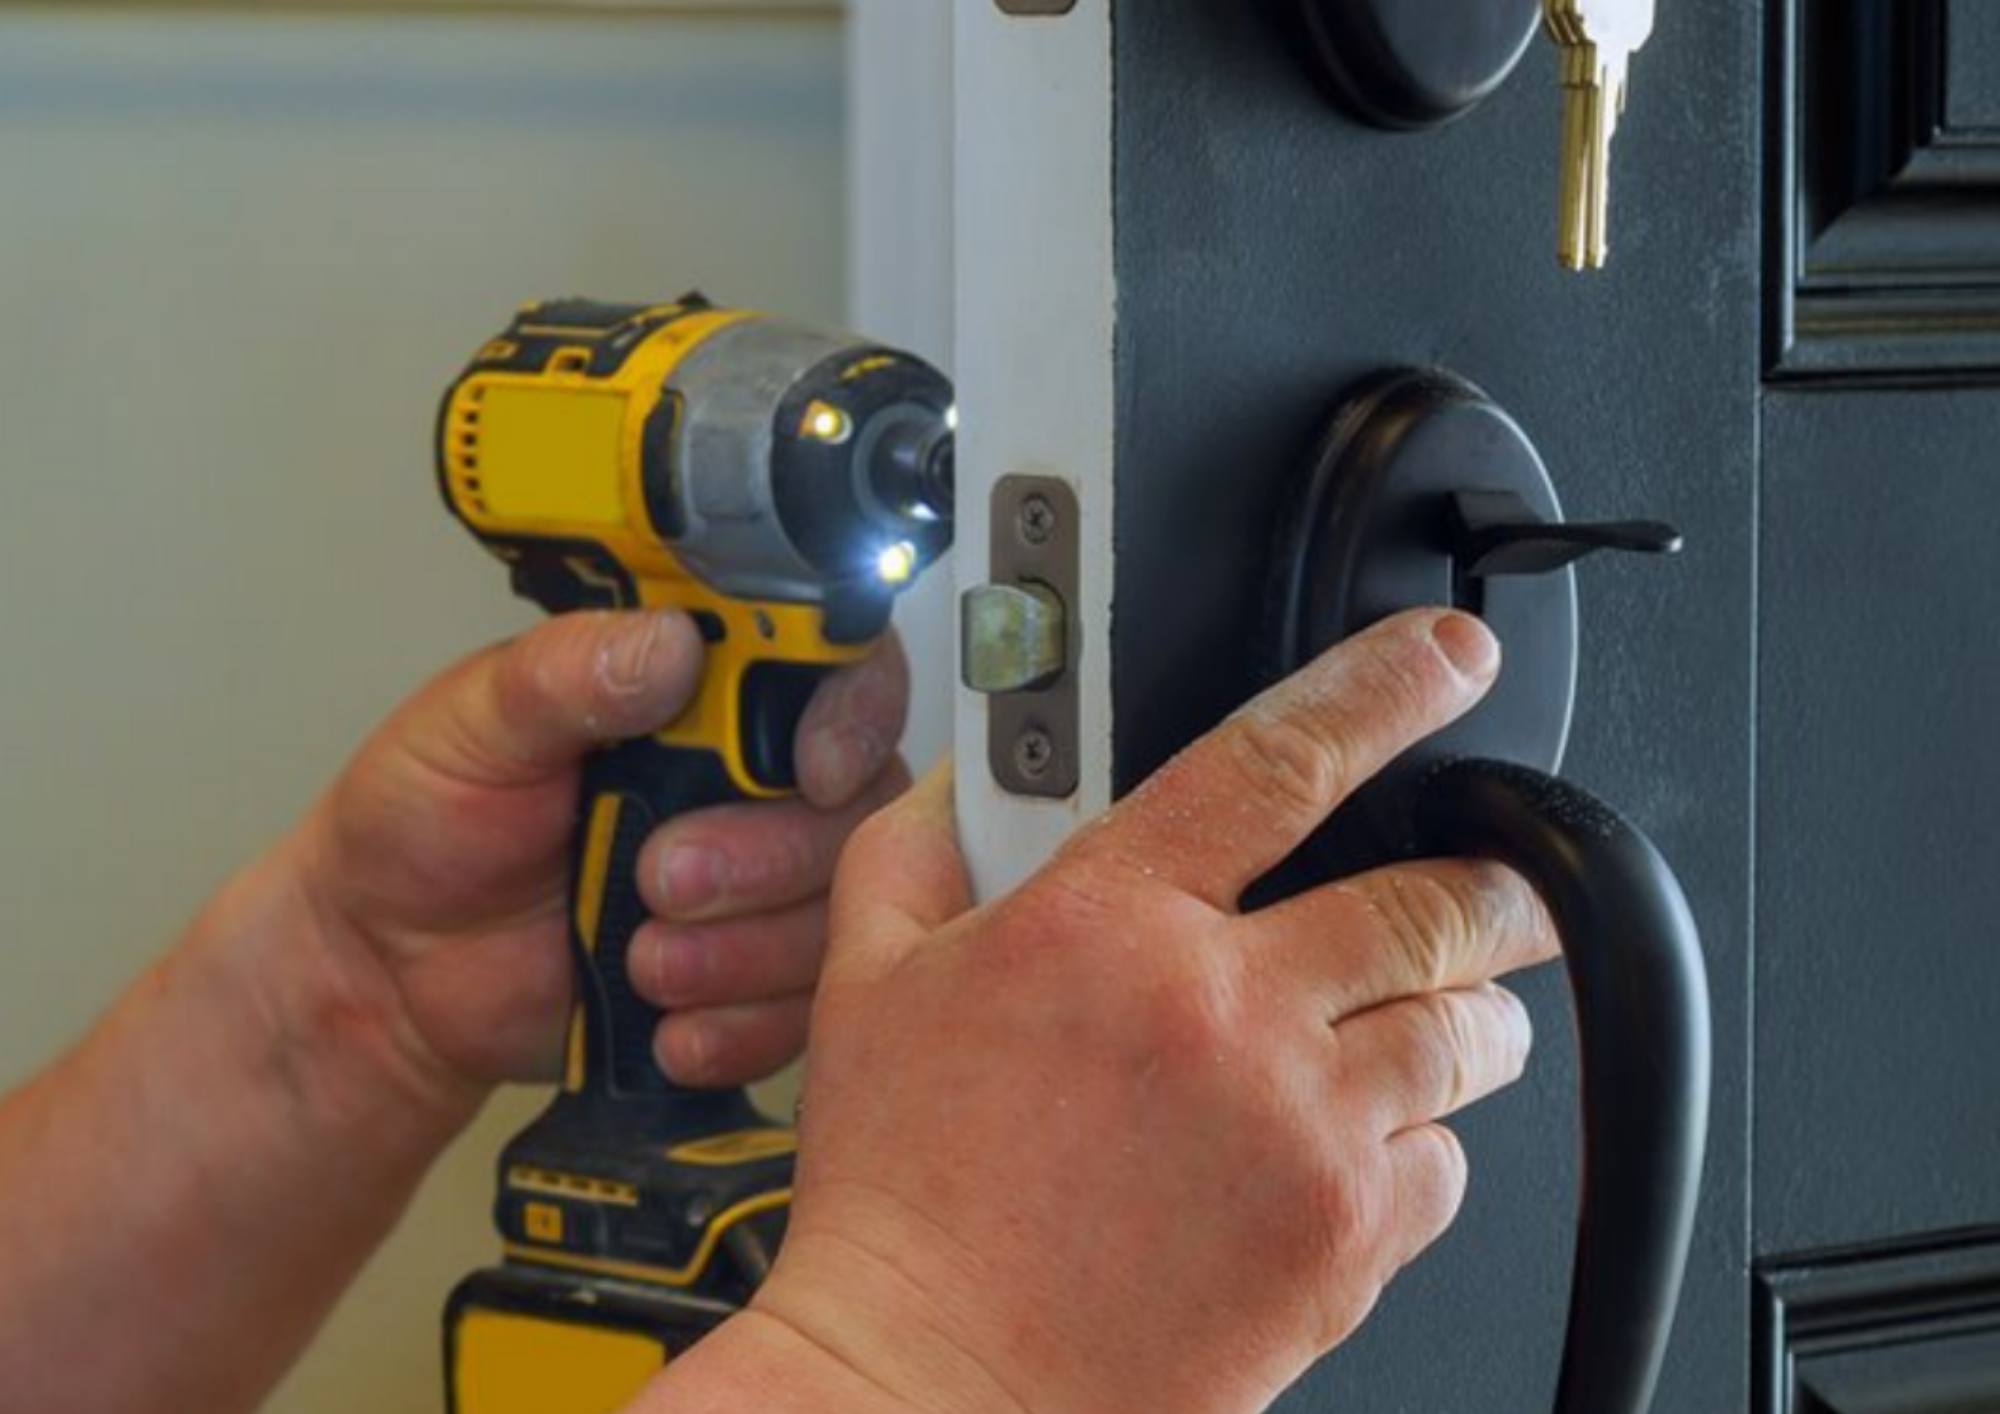 Hire A Hubby can repair & maintain your door locks to keep your family safe & secure.